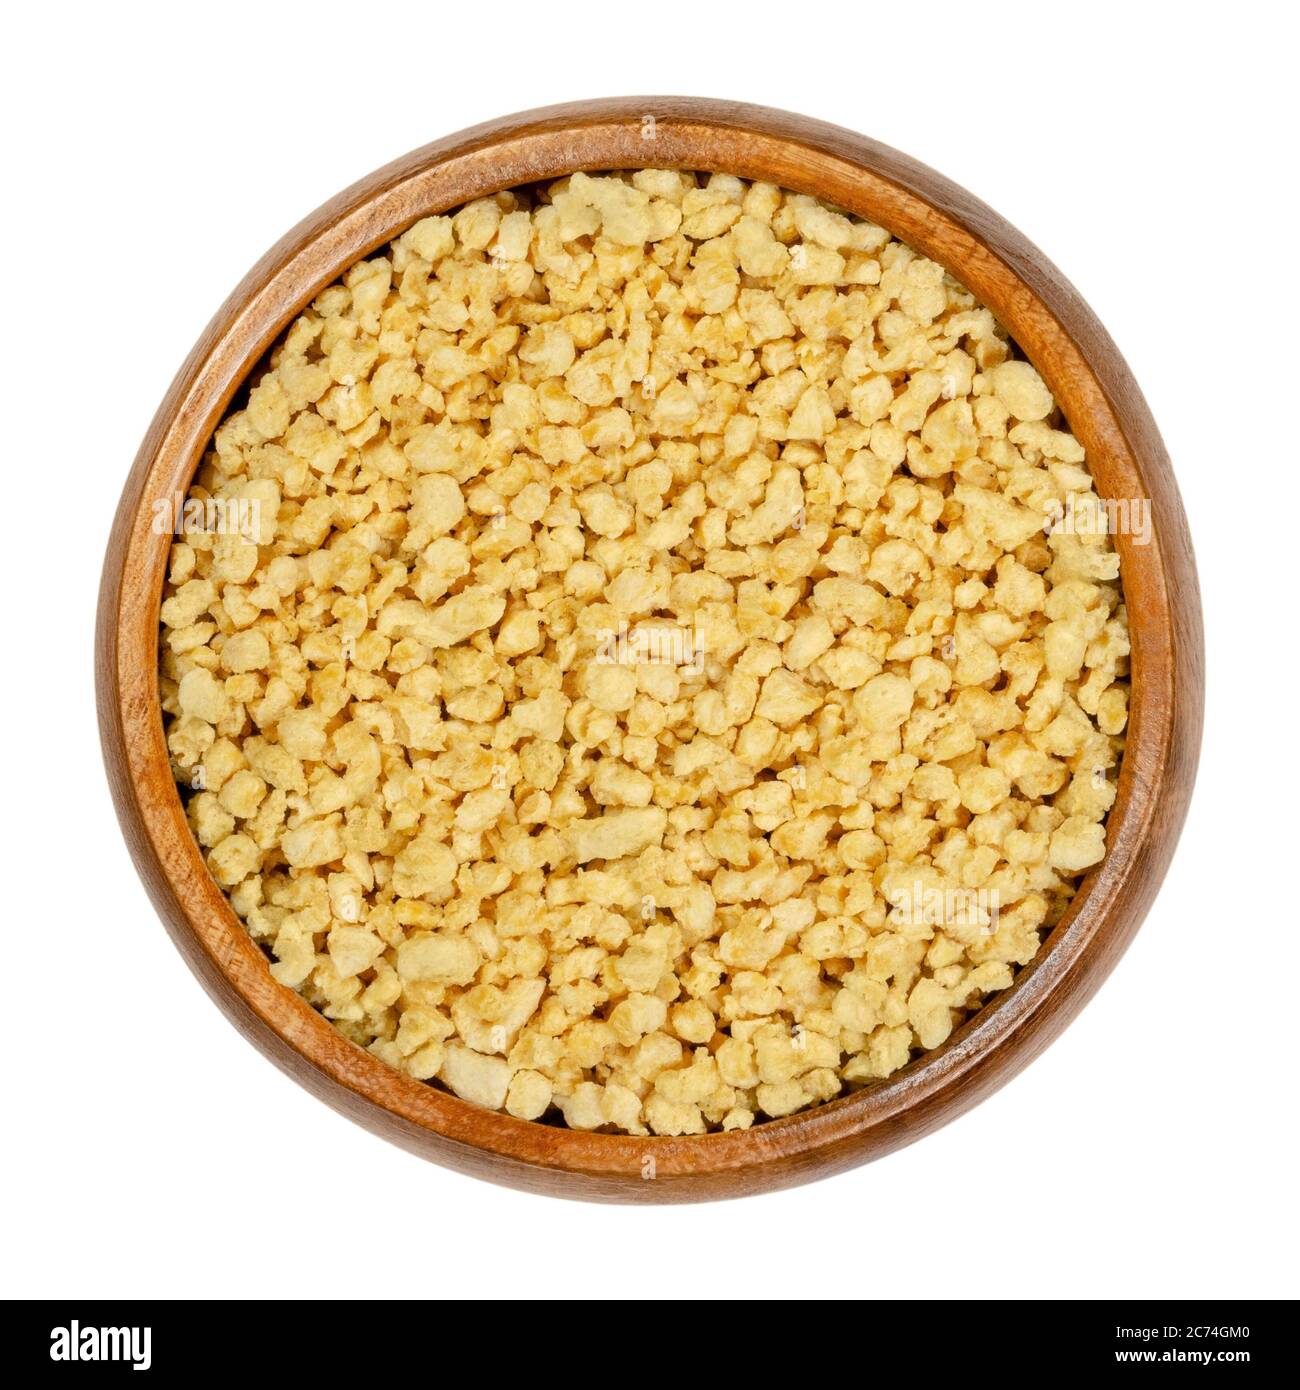 Soya granules in wooden bowl. Textured soy protein, also called soy meat. Defatted soy flour product, used as meat analogue or meat extender. Stock Photo